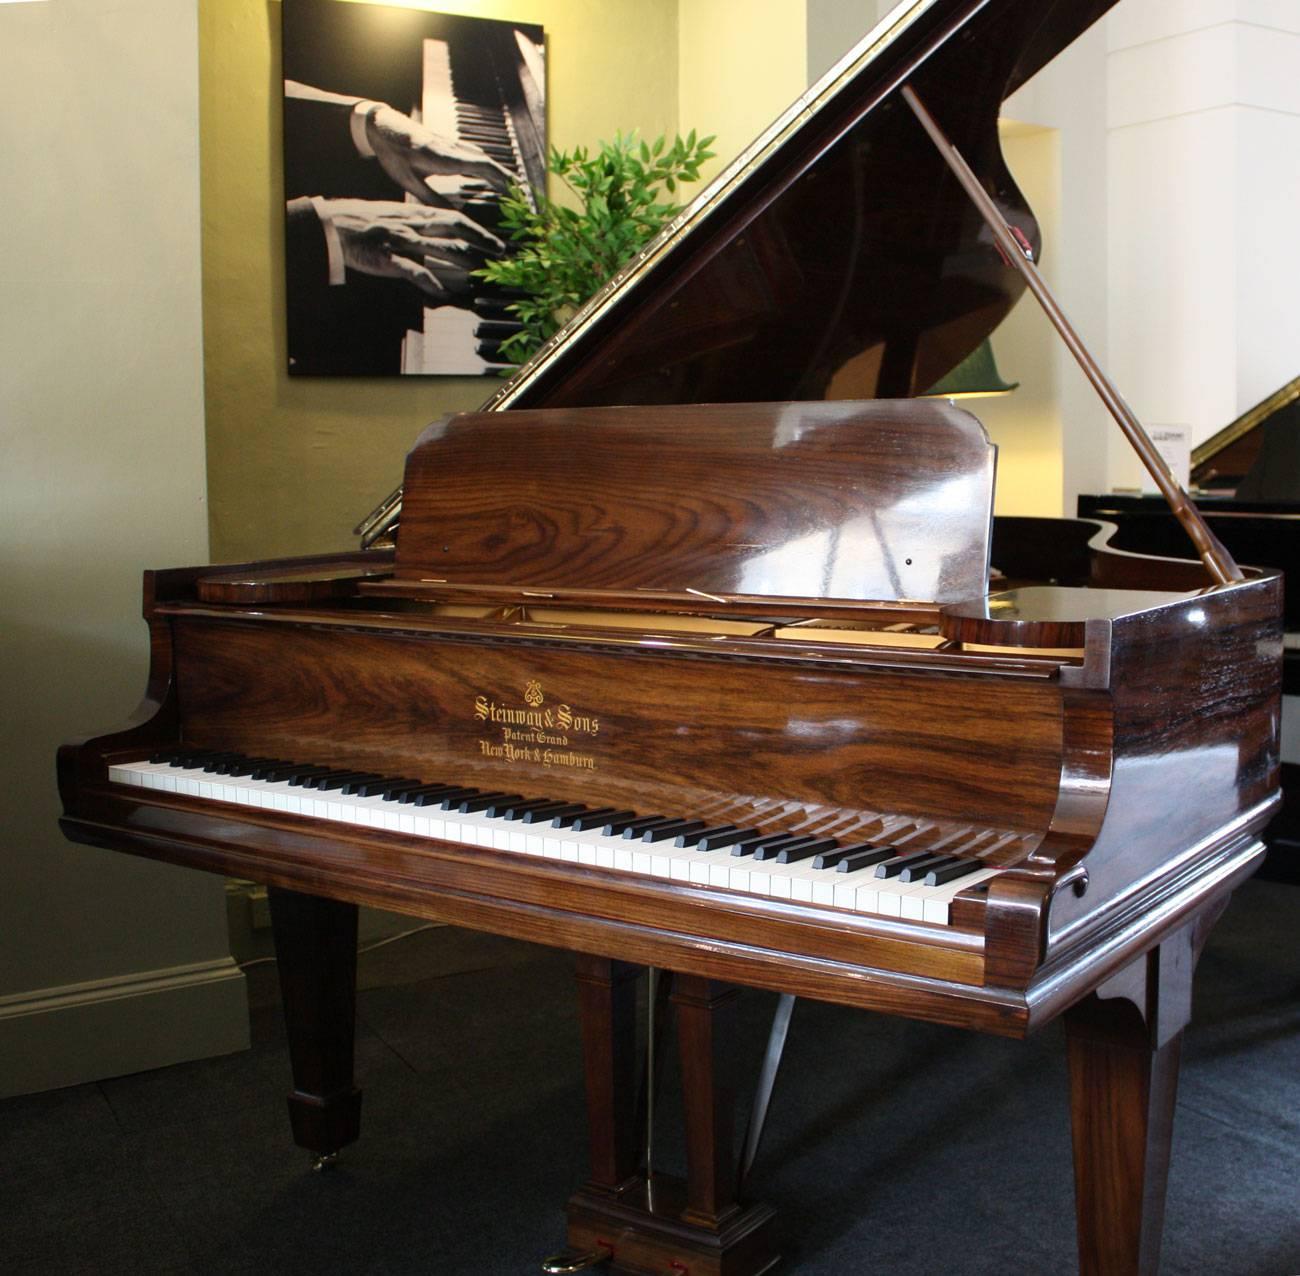 A beautiful example of a steinway grand piano The Model O is the largest of Steinway's 'small' grand pianos, producing a rich tone but with a size that will fit most living spaces. This piano was manufactured in 1908 and has been lovingly restored